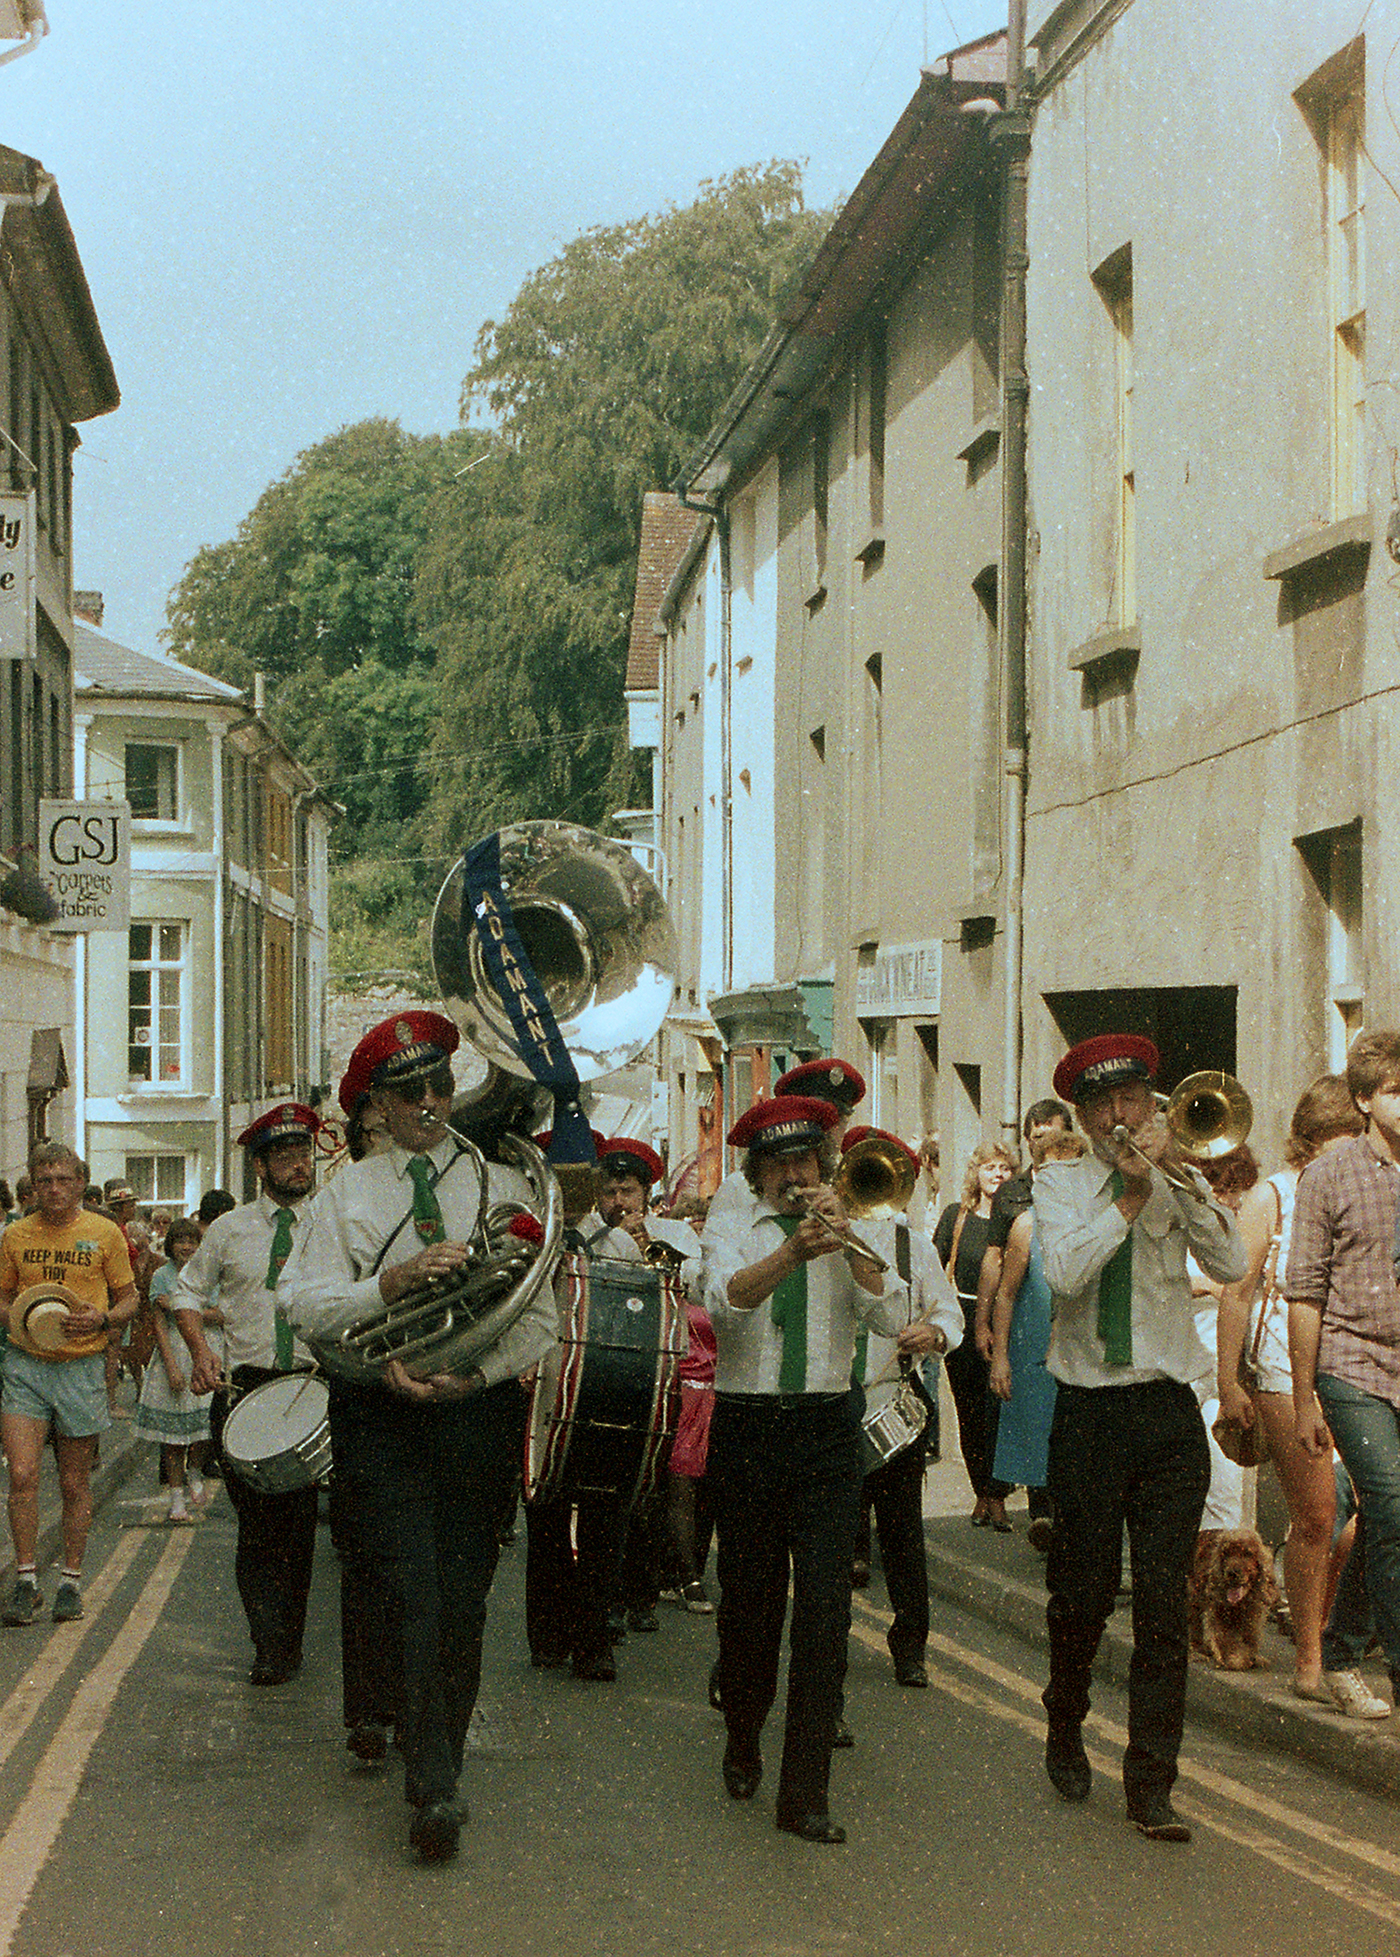 Image of a brass band in smart uniform parading the streets of Brecon 